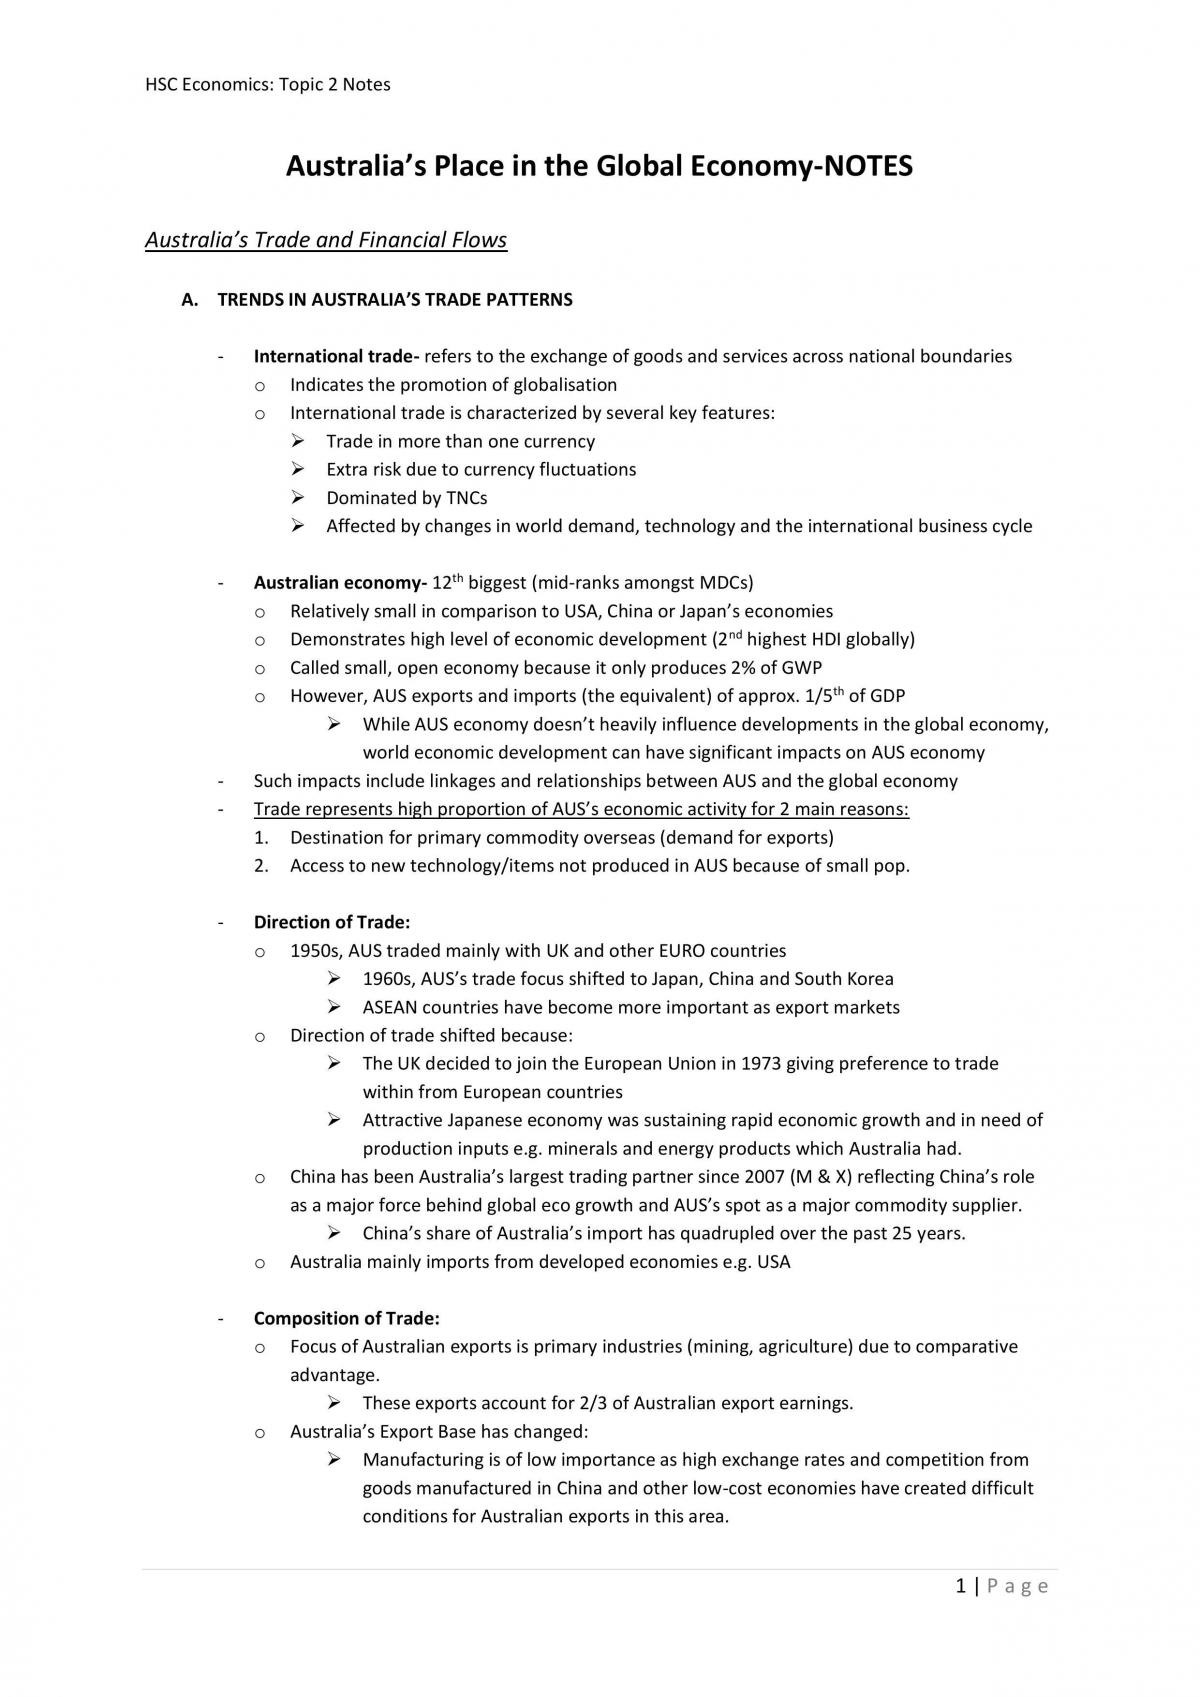 10.2 Australia's Place in the Global Economy Full Notes - Page 1